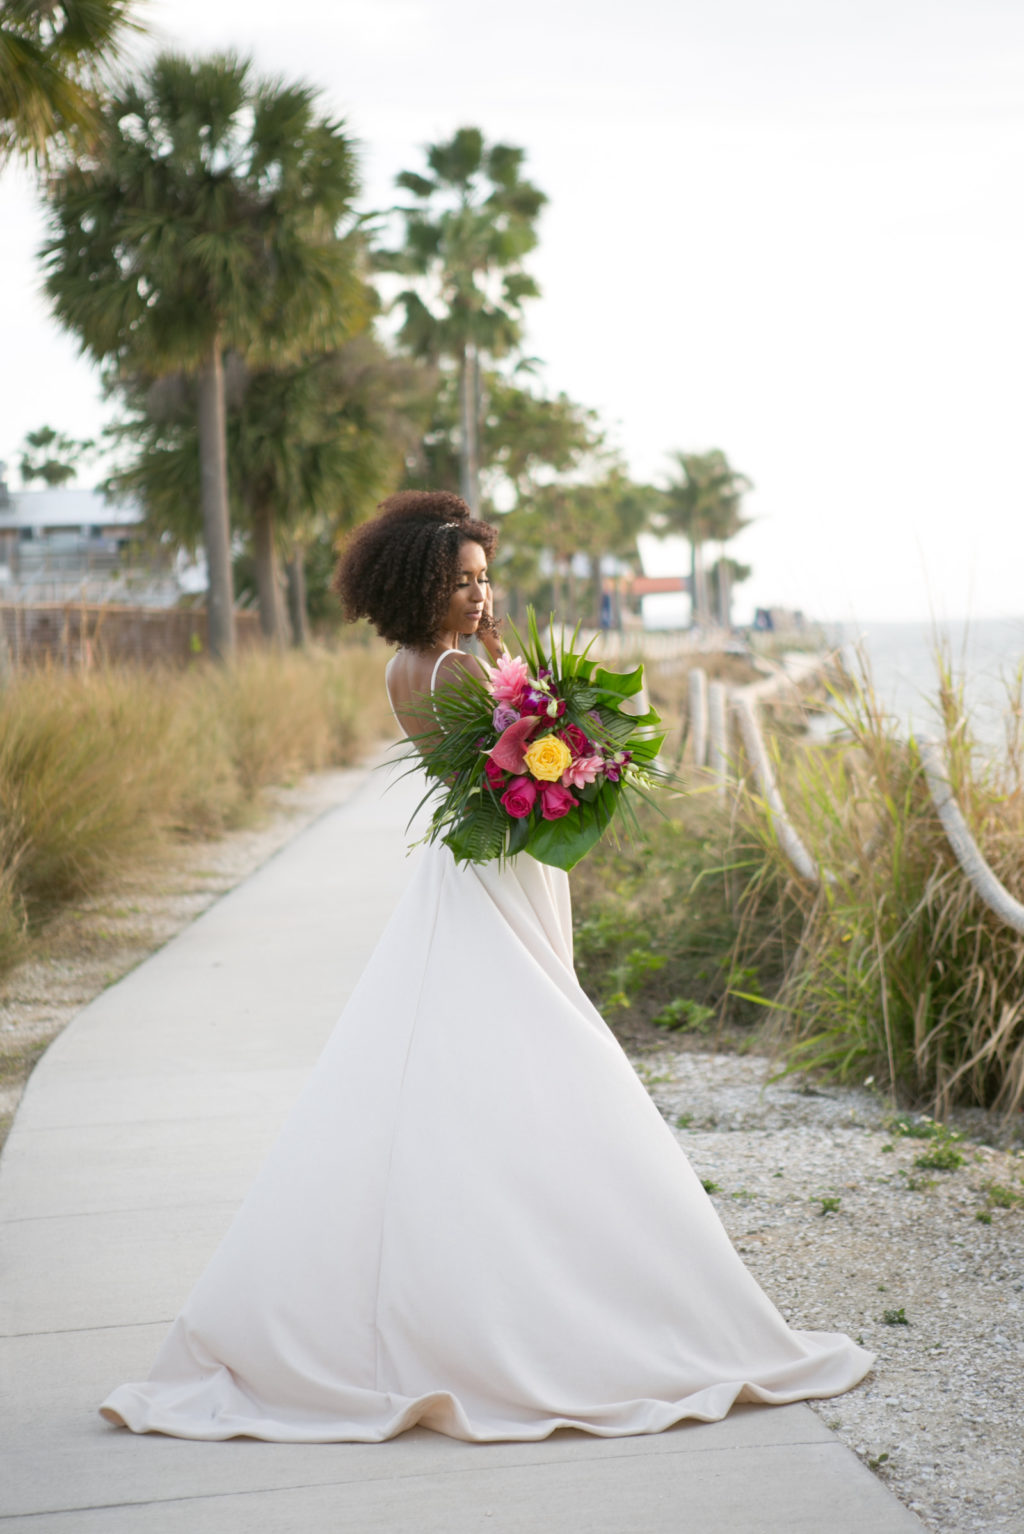 Boho Florida Bride Wearing Elegant Flowy Wedding Dress with High Slit, Holding Modern Tropical Inspired Floral Bouquet with Vibrant Yellow Roses, Bright Pink Flowers, Monstera and Palm Leaves | Salt Shack On the Bay Wedding | Tampa Bay Wedding Photographer Carrie Wildes Photography | South Tampa Wedding Planners Socialite Events | Wedding Dress Boutique Truly Forever Bridal Tampa